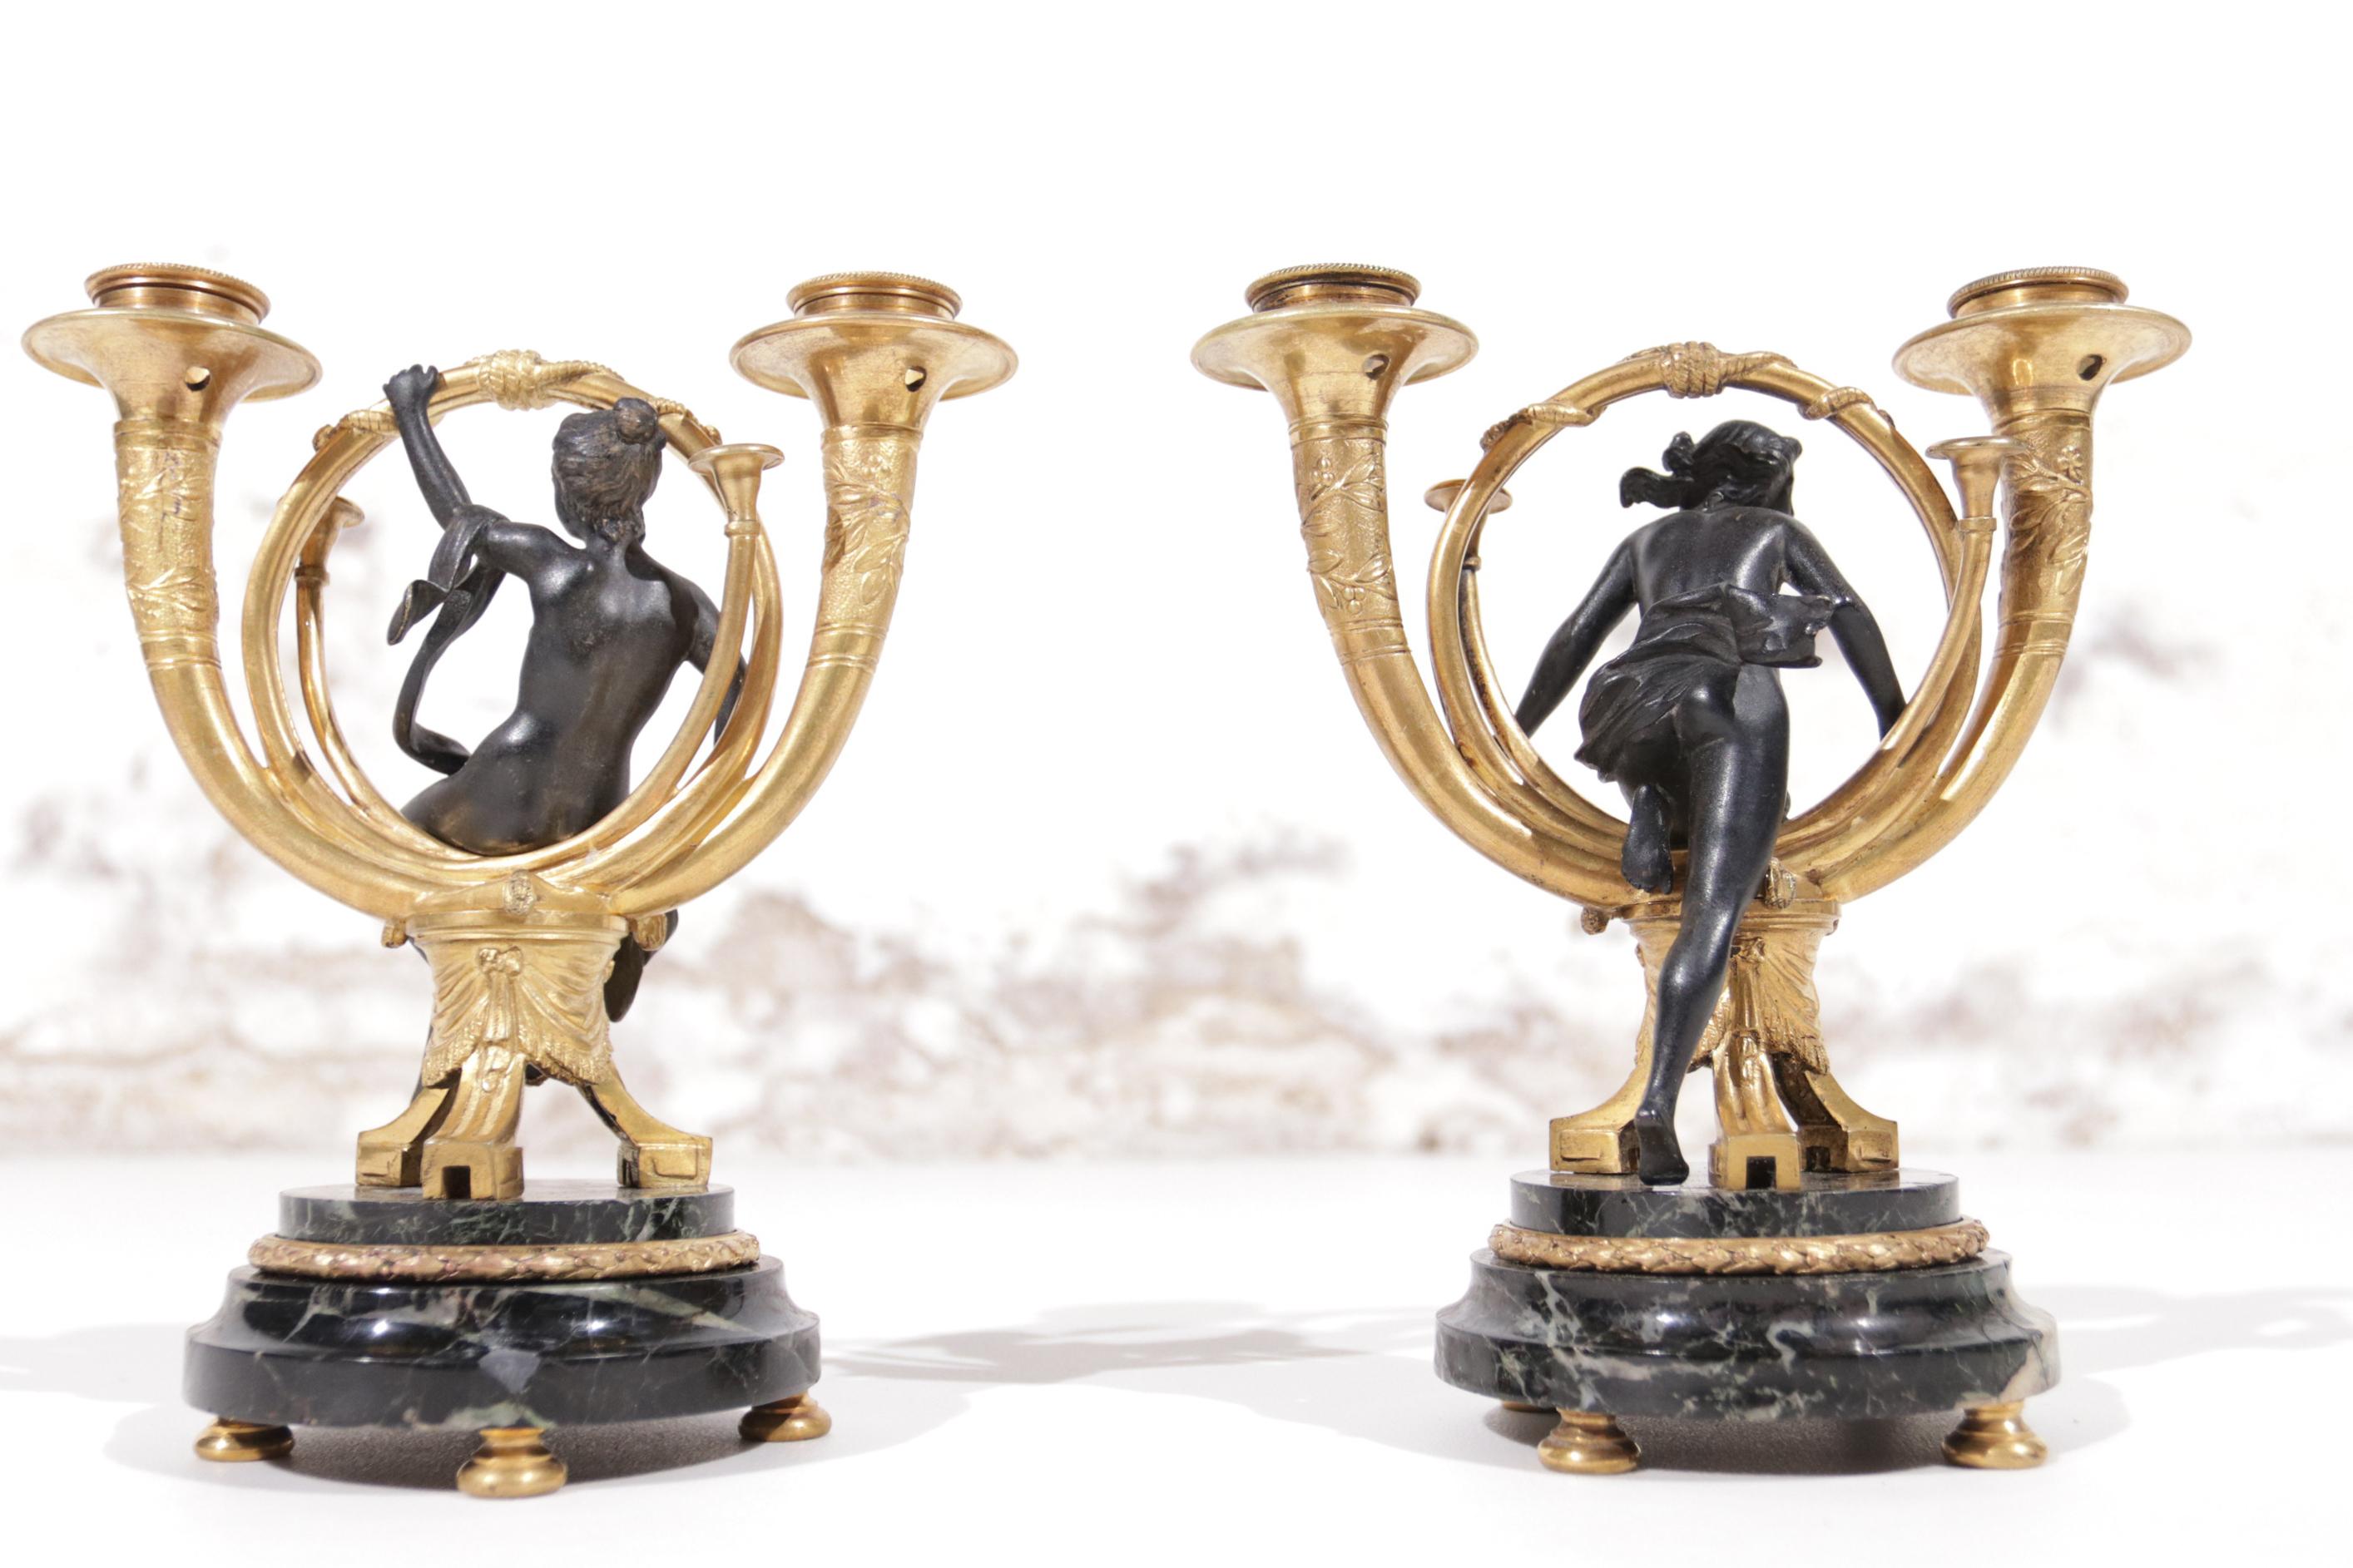 Pair of Exquisite French Empire Gilt Bronze Two-Light Candelabra ca 1810 For Sale 3